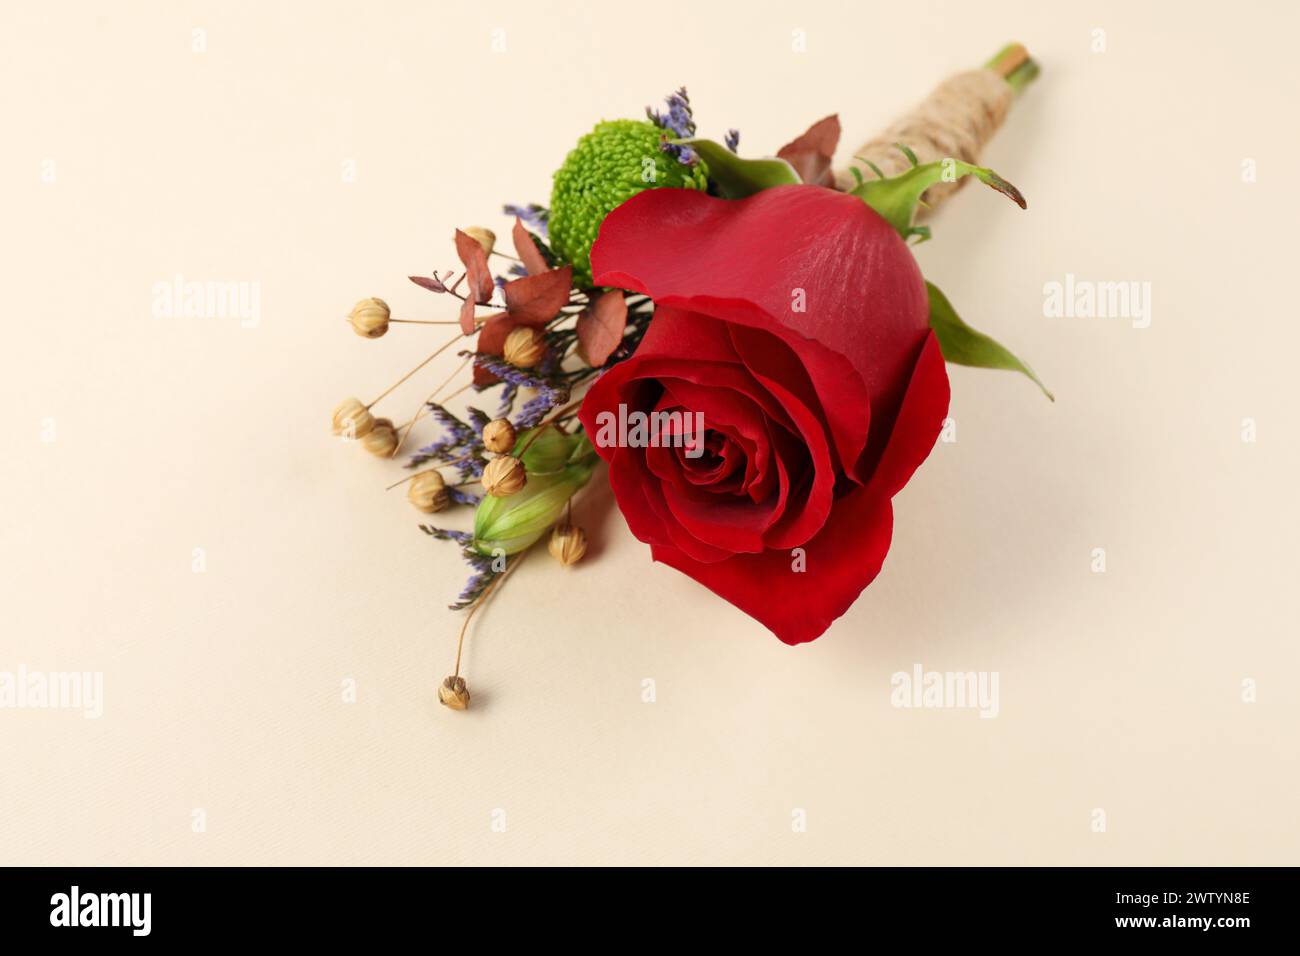 Stylish boutonniere with red rose on beige background, closeup Stock Photo